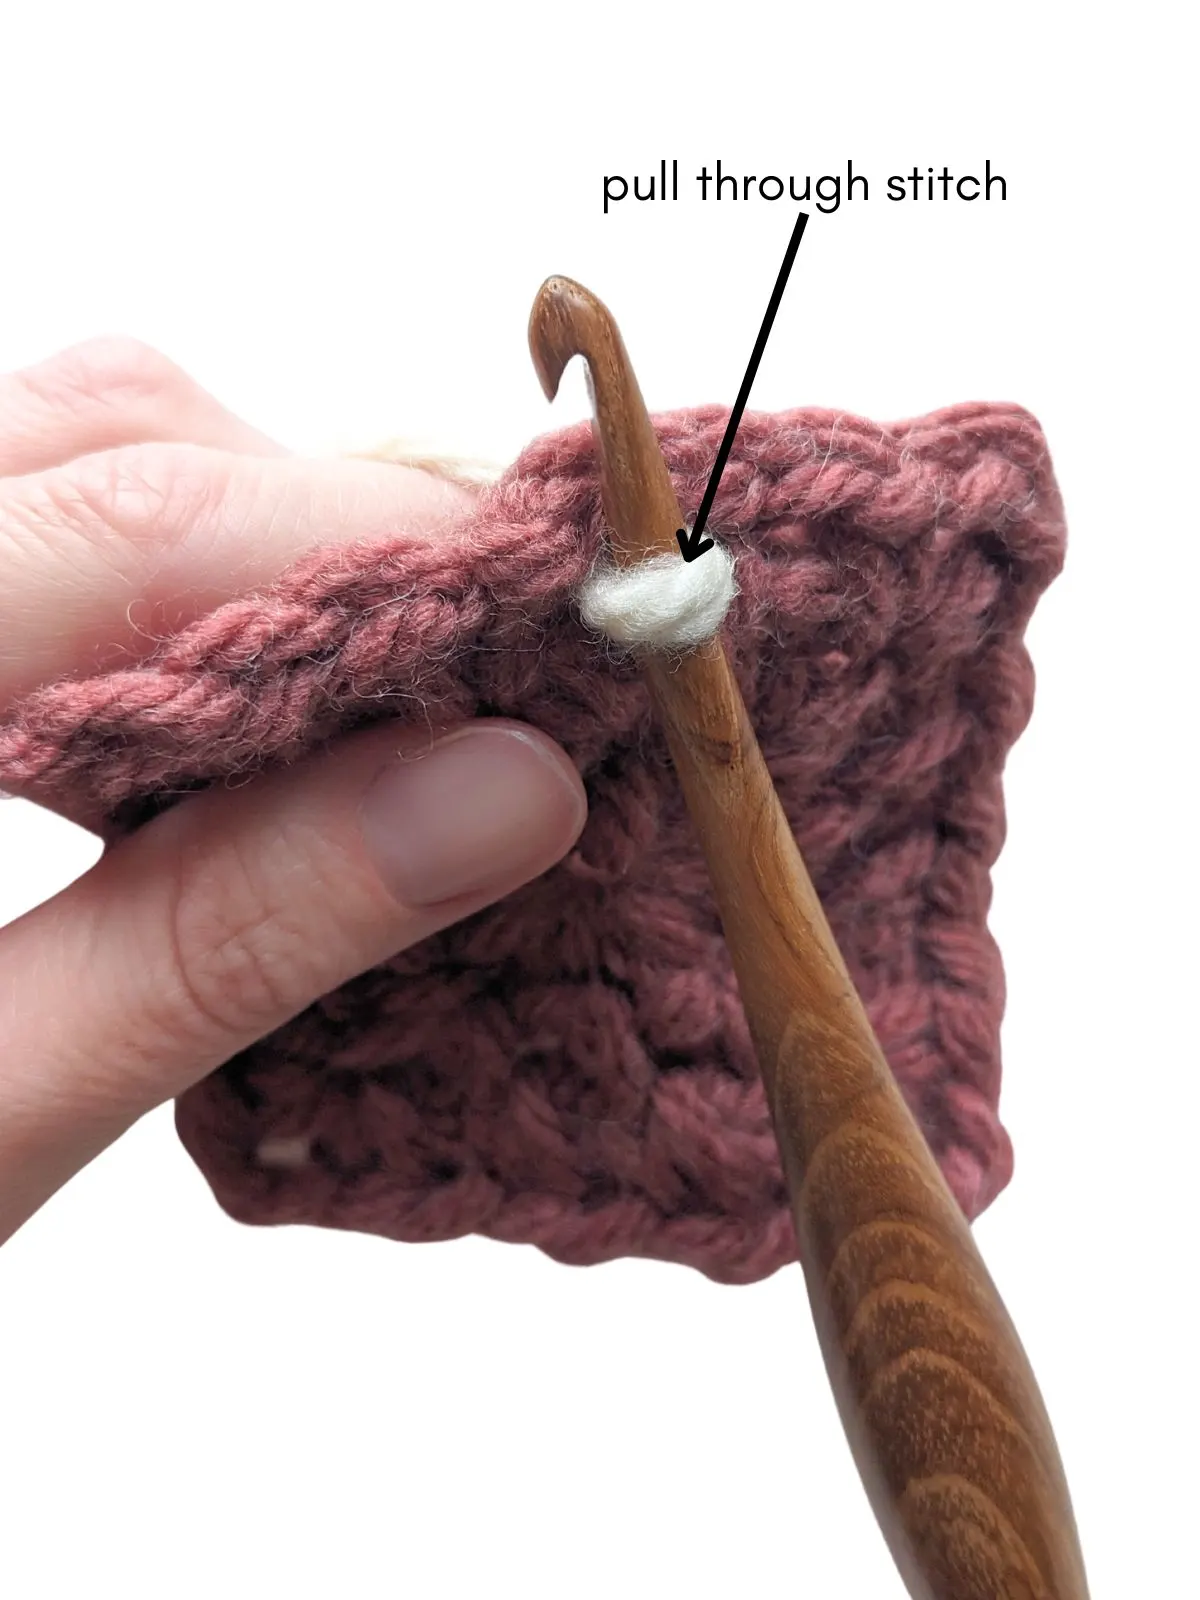 A crochet hook is being pulled through the stitch. 